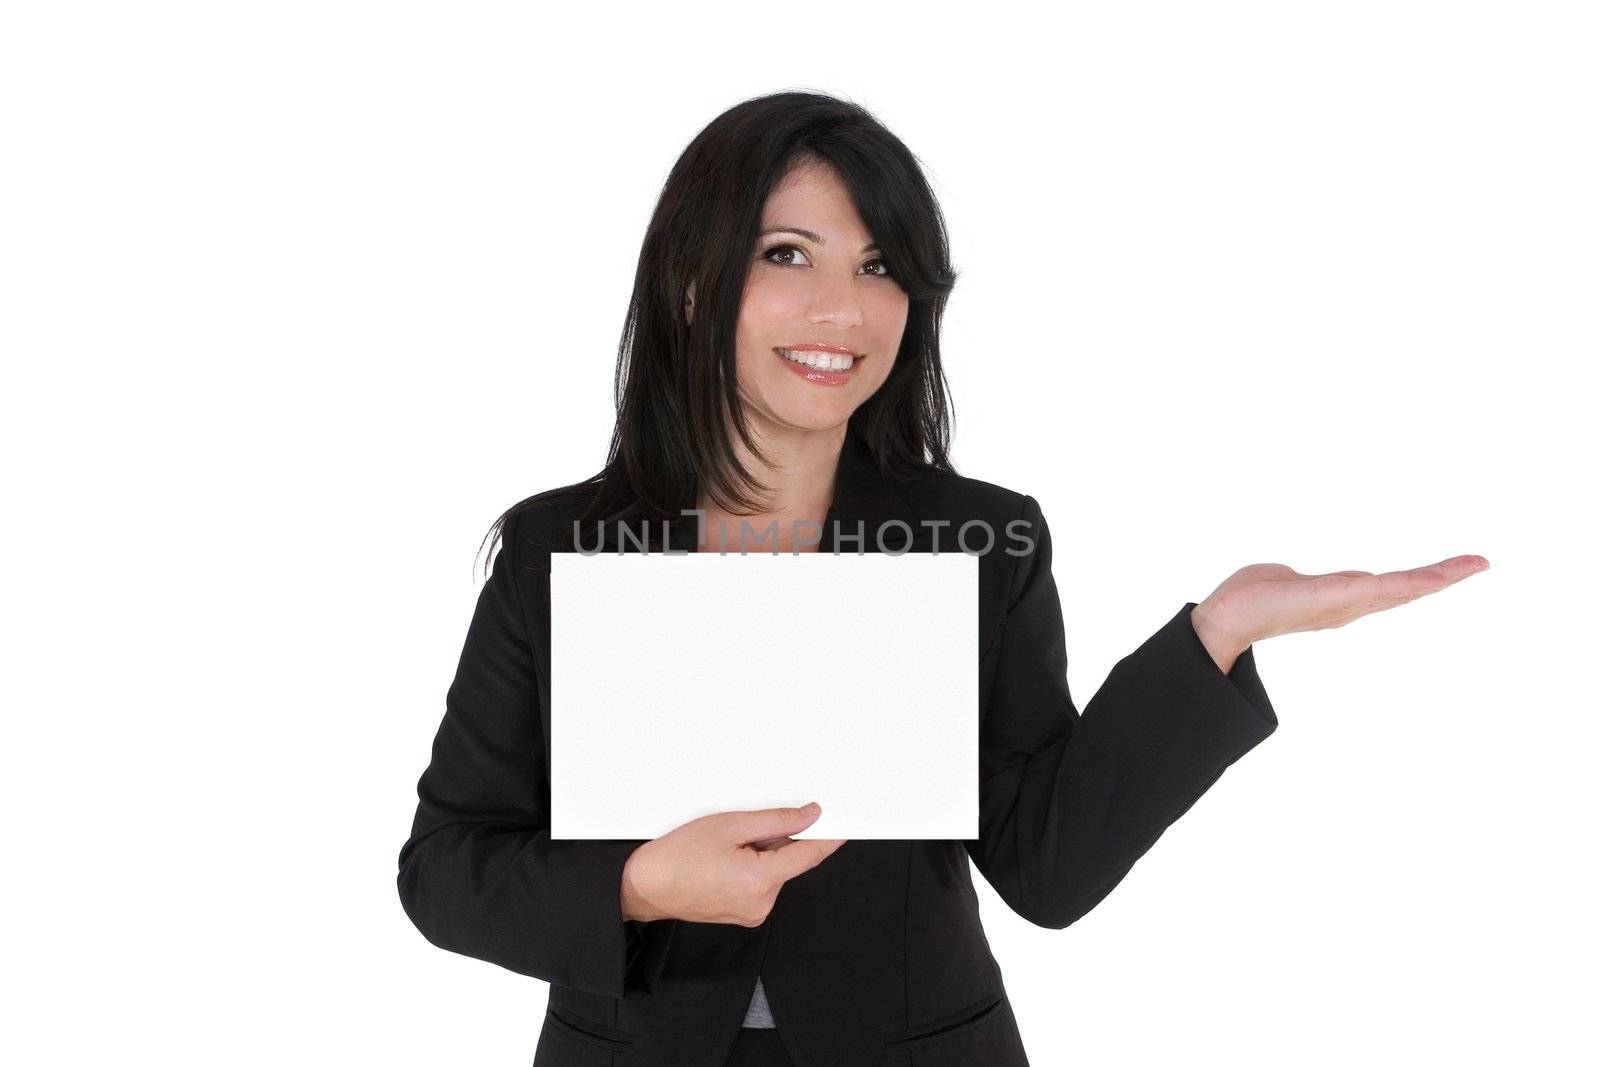 Female with hand outstretched holding your product and displaying a message.